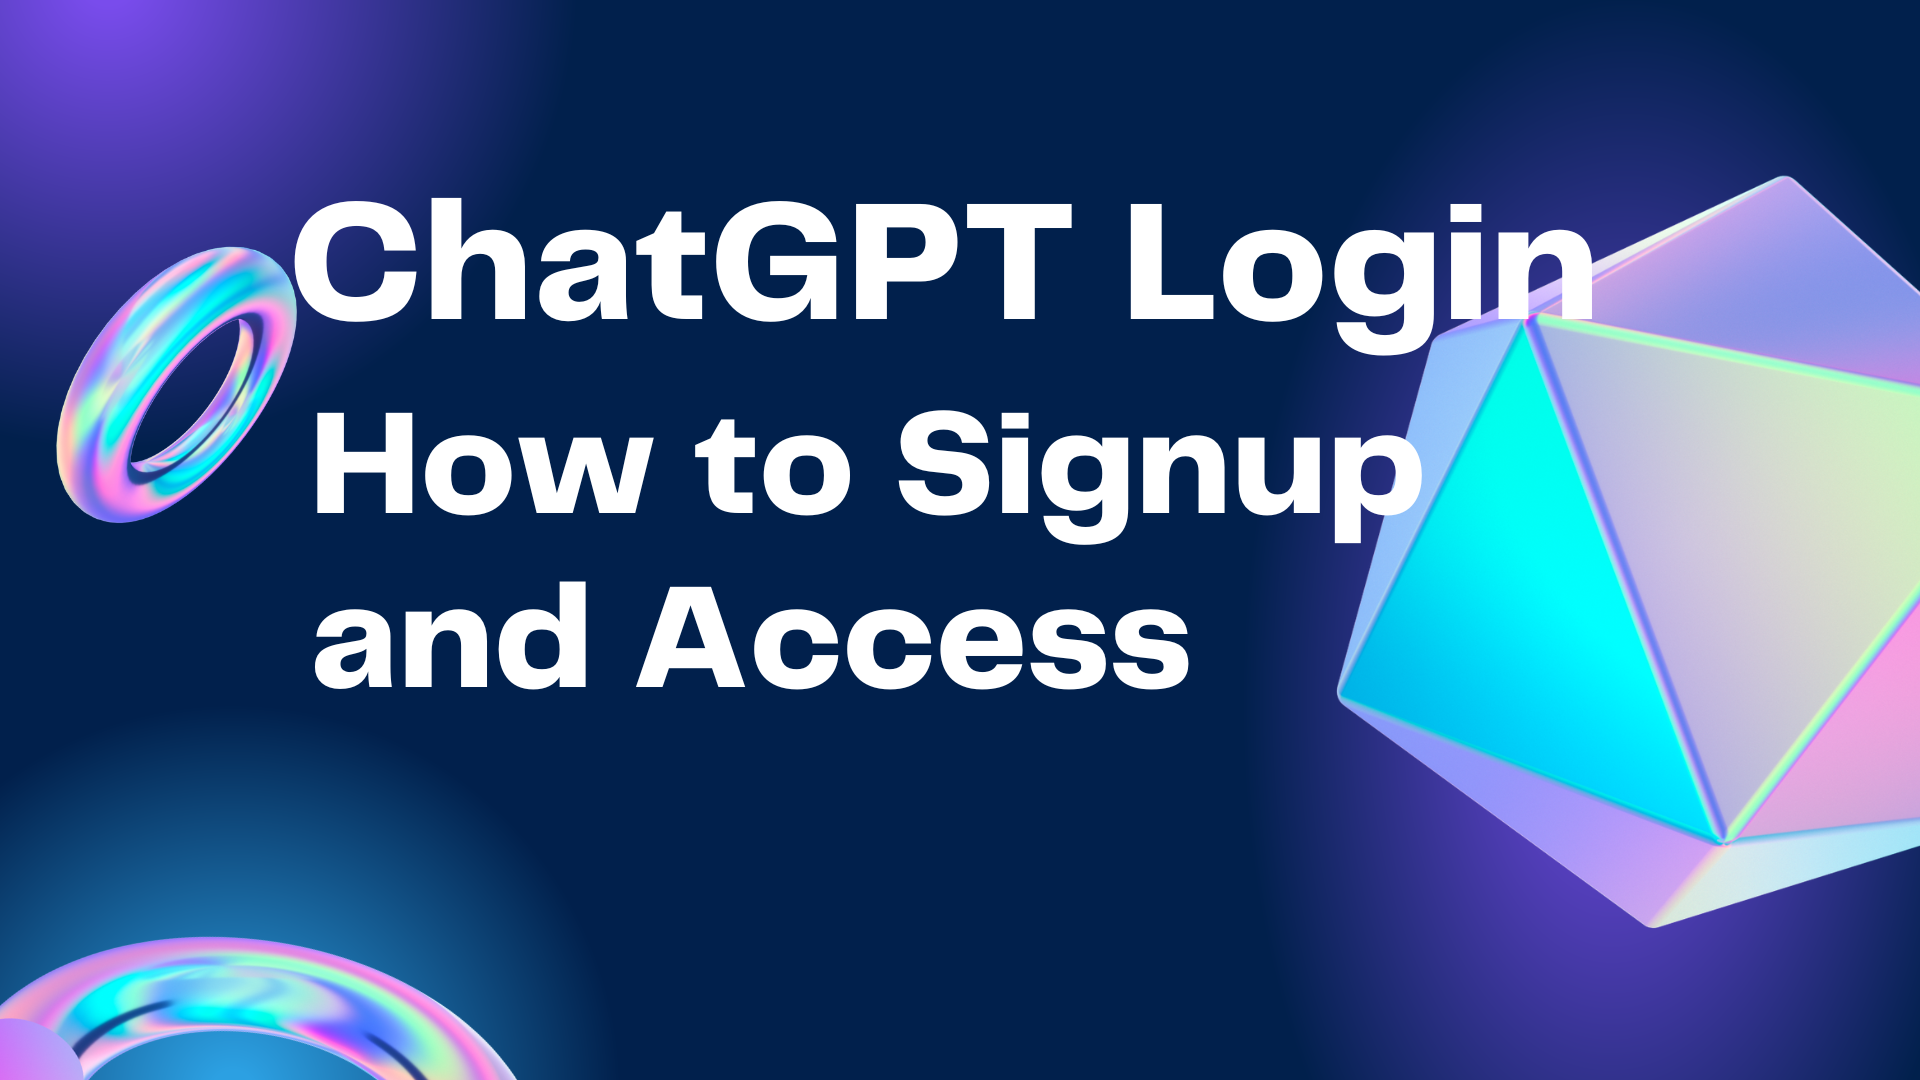 ChatGPT Login - How to Signup and Access